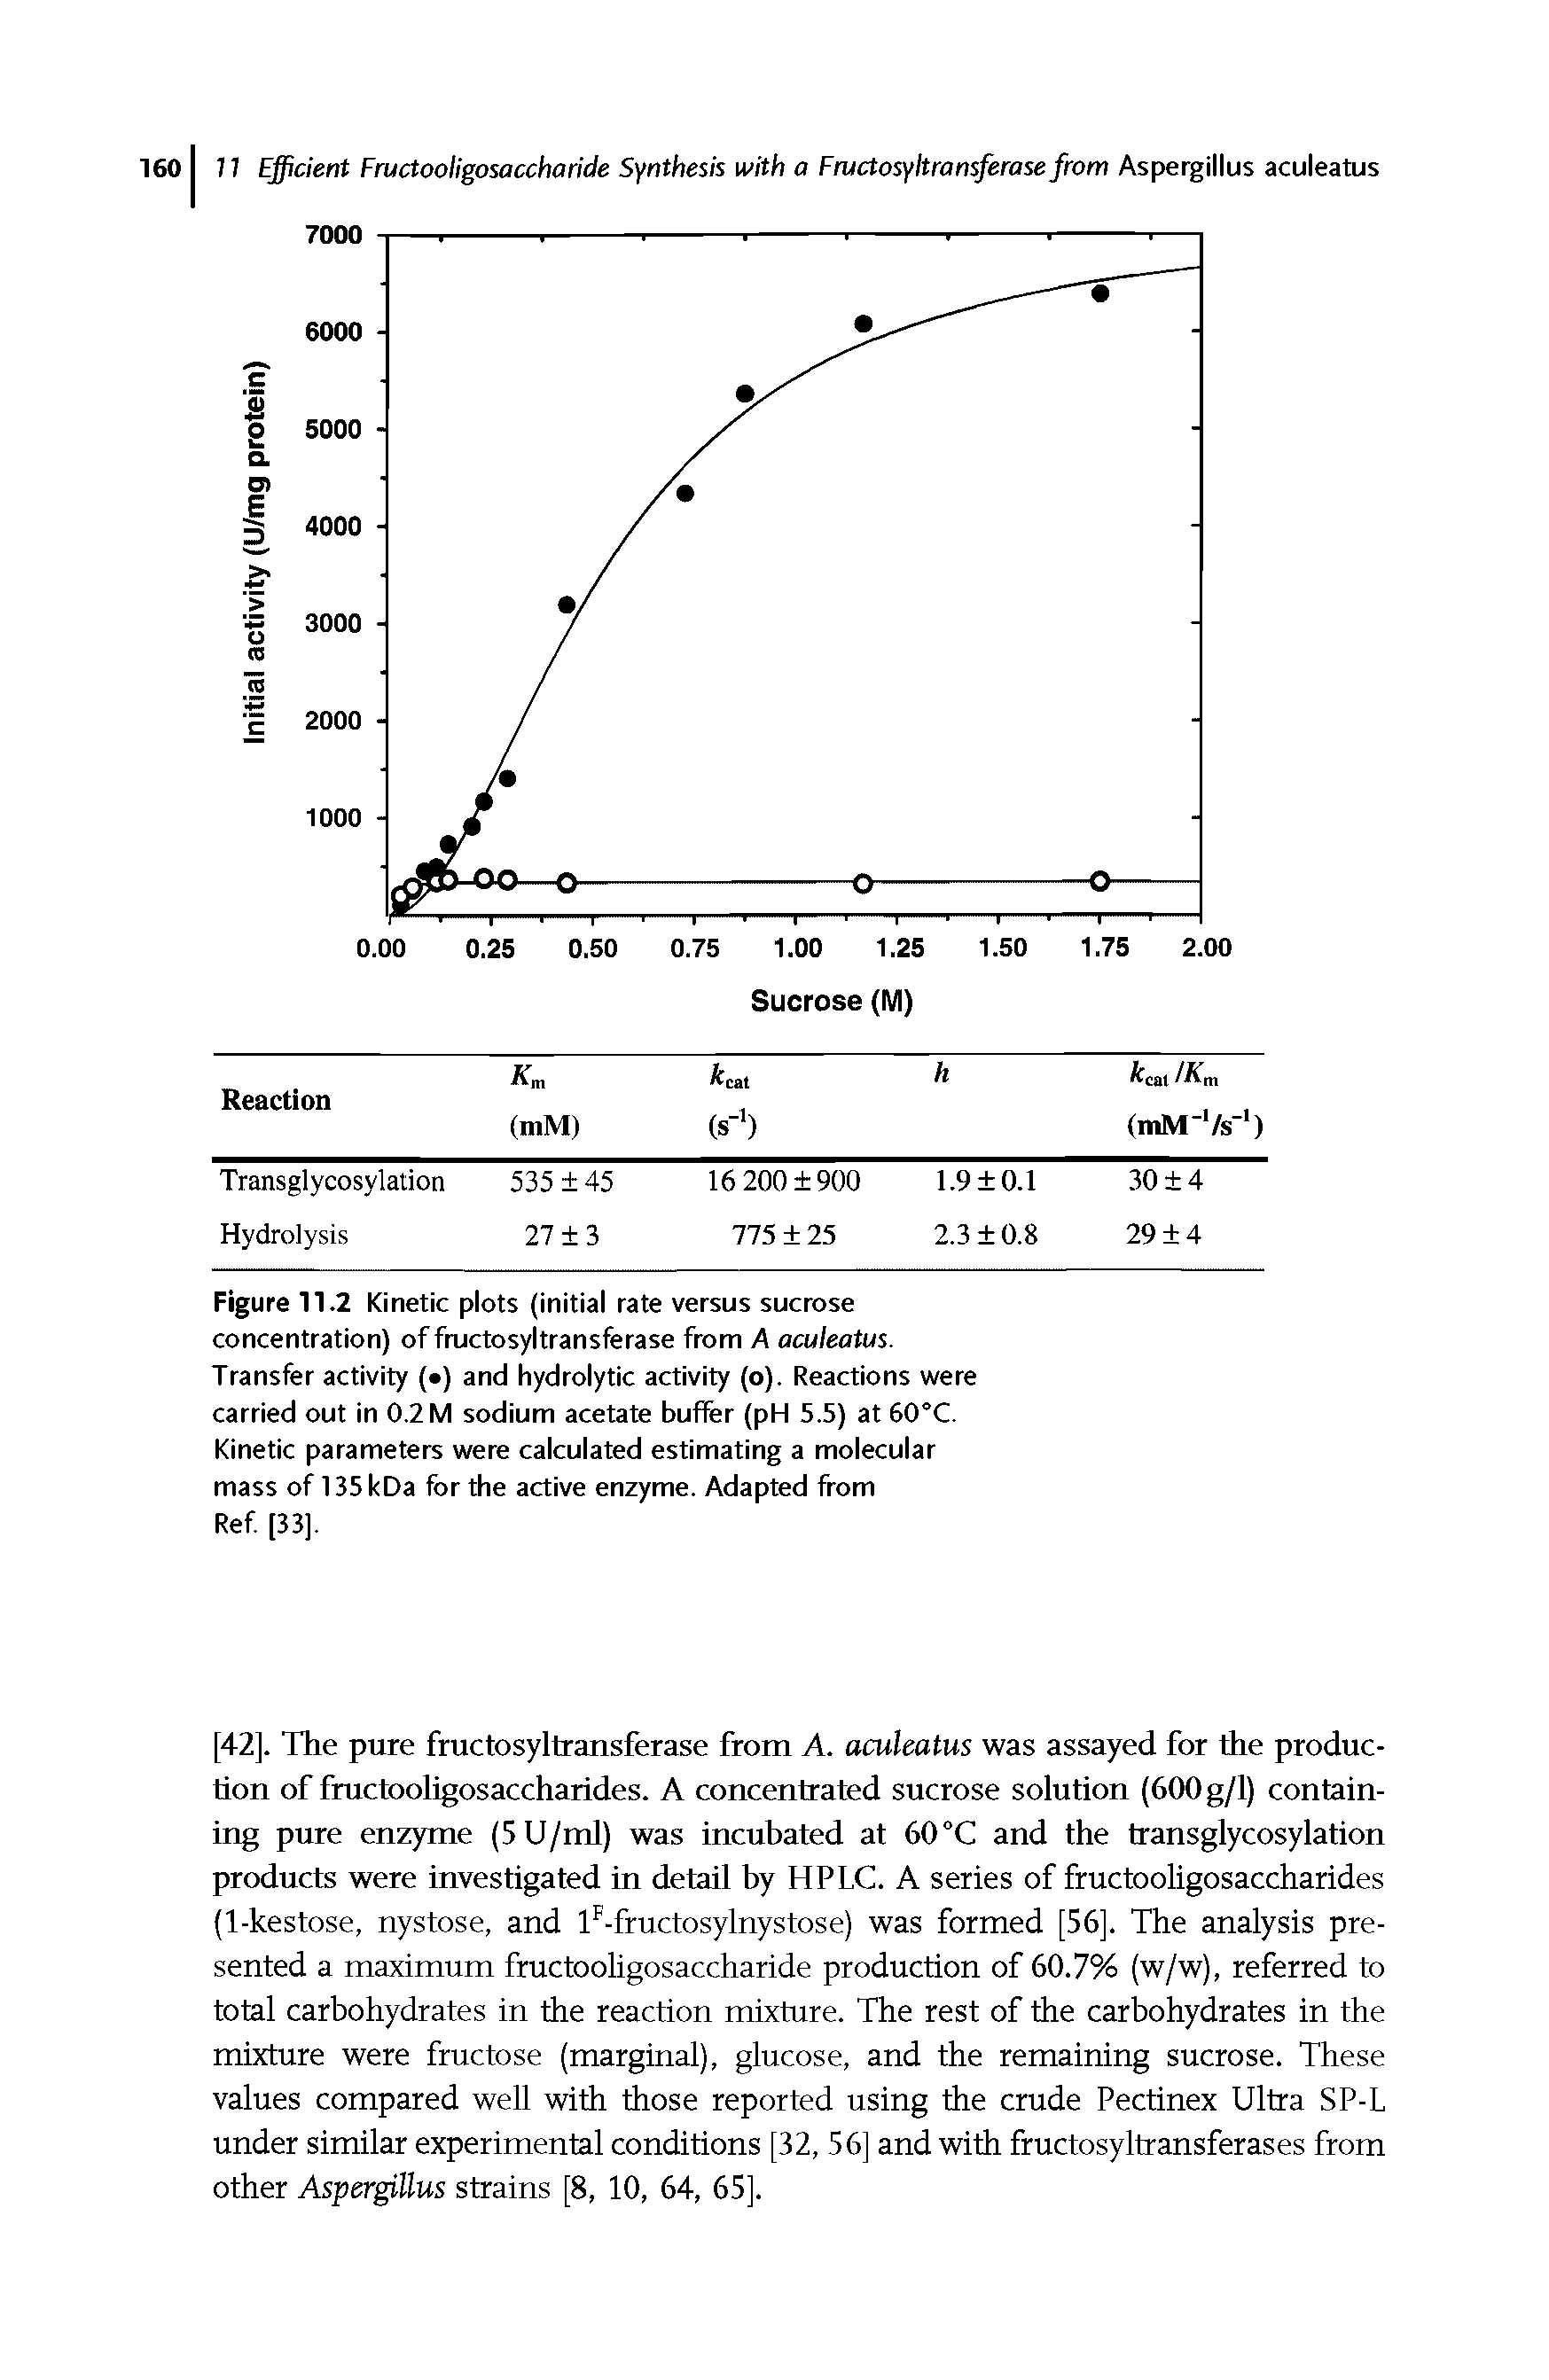 Figure 11.2 Kinetic plots (initial rate versus sucrose concentration) of fructosyltransferase from A aculeatus. Transfer activity ( ) and hydrolytic activity (o). Reactions were carried out in 0.2 M sodium acetate buffer (pH 5.5) at 60°C. Kinetic parameters were calculated estimating a molecular mass of 135 kDa for the active enzyme. Adapted from Ref [33].